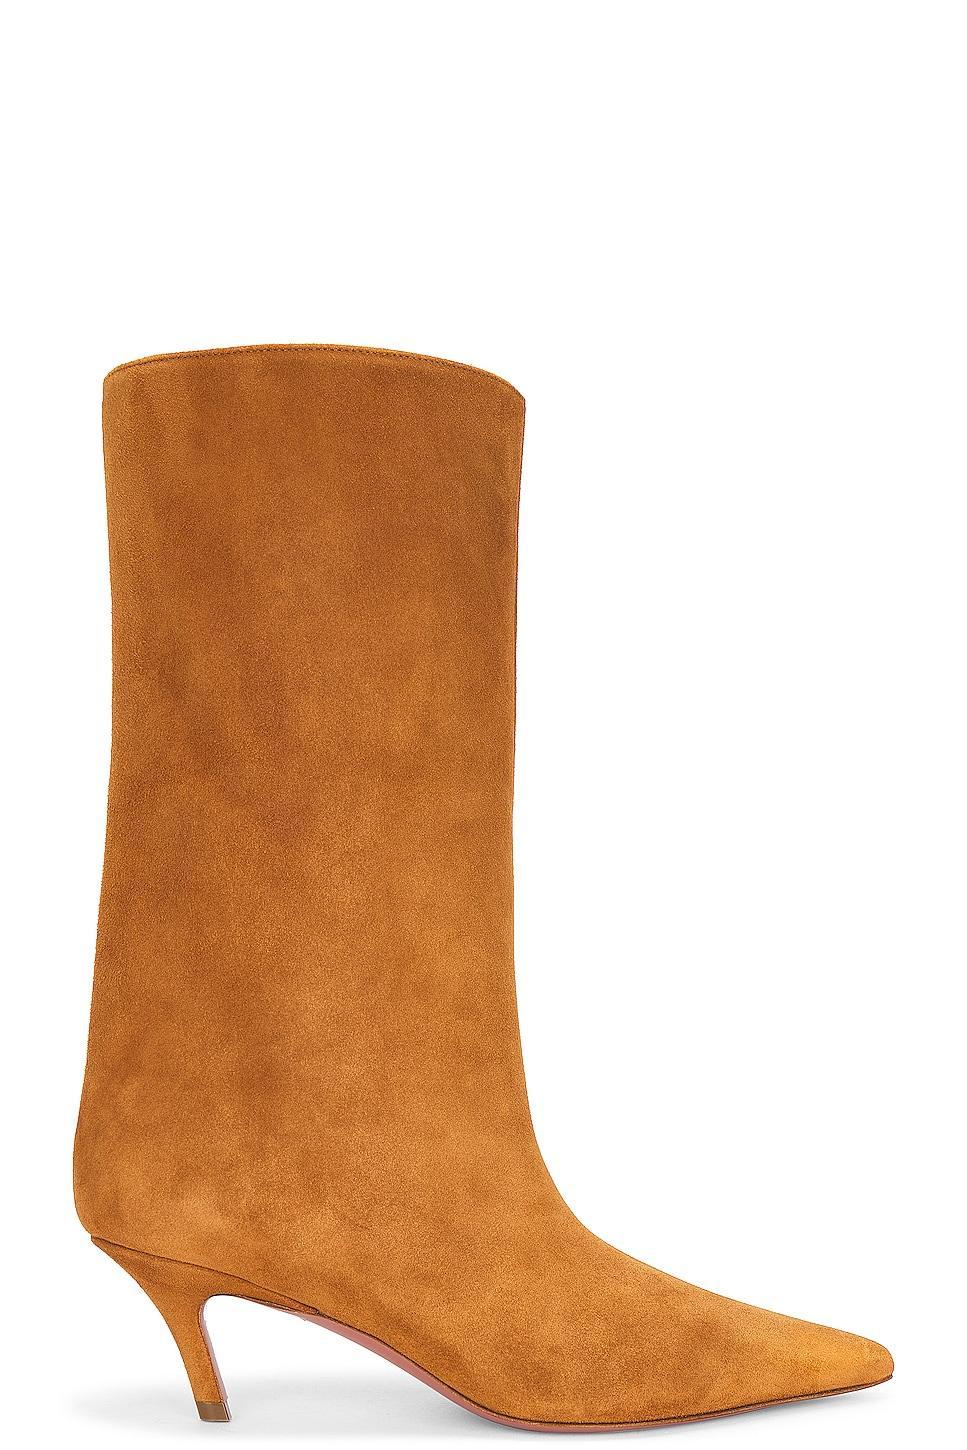 AMINA MUADDI Fiona Suede 60 Boot in Brown Product Image